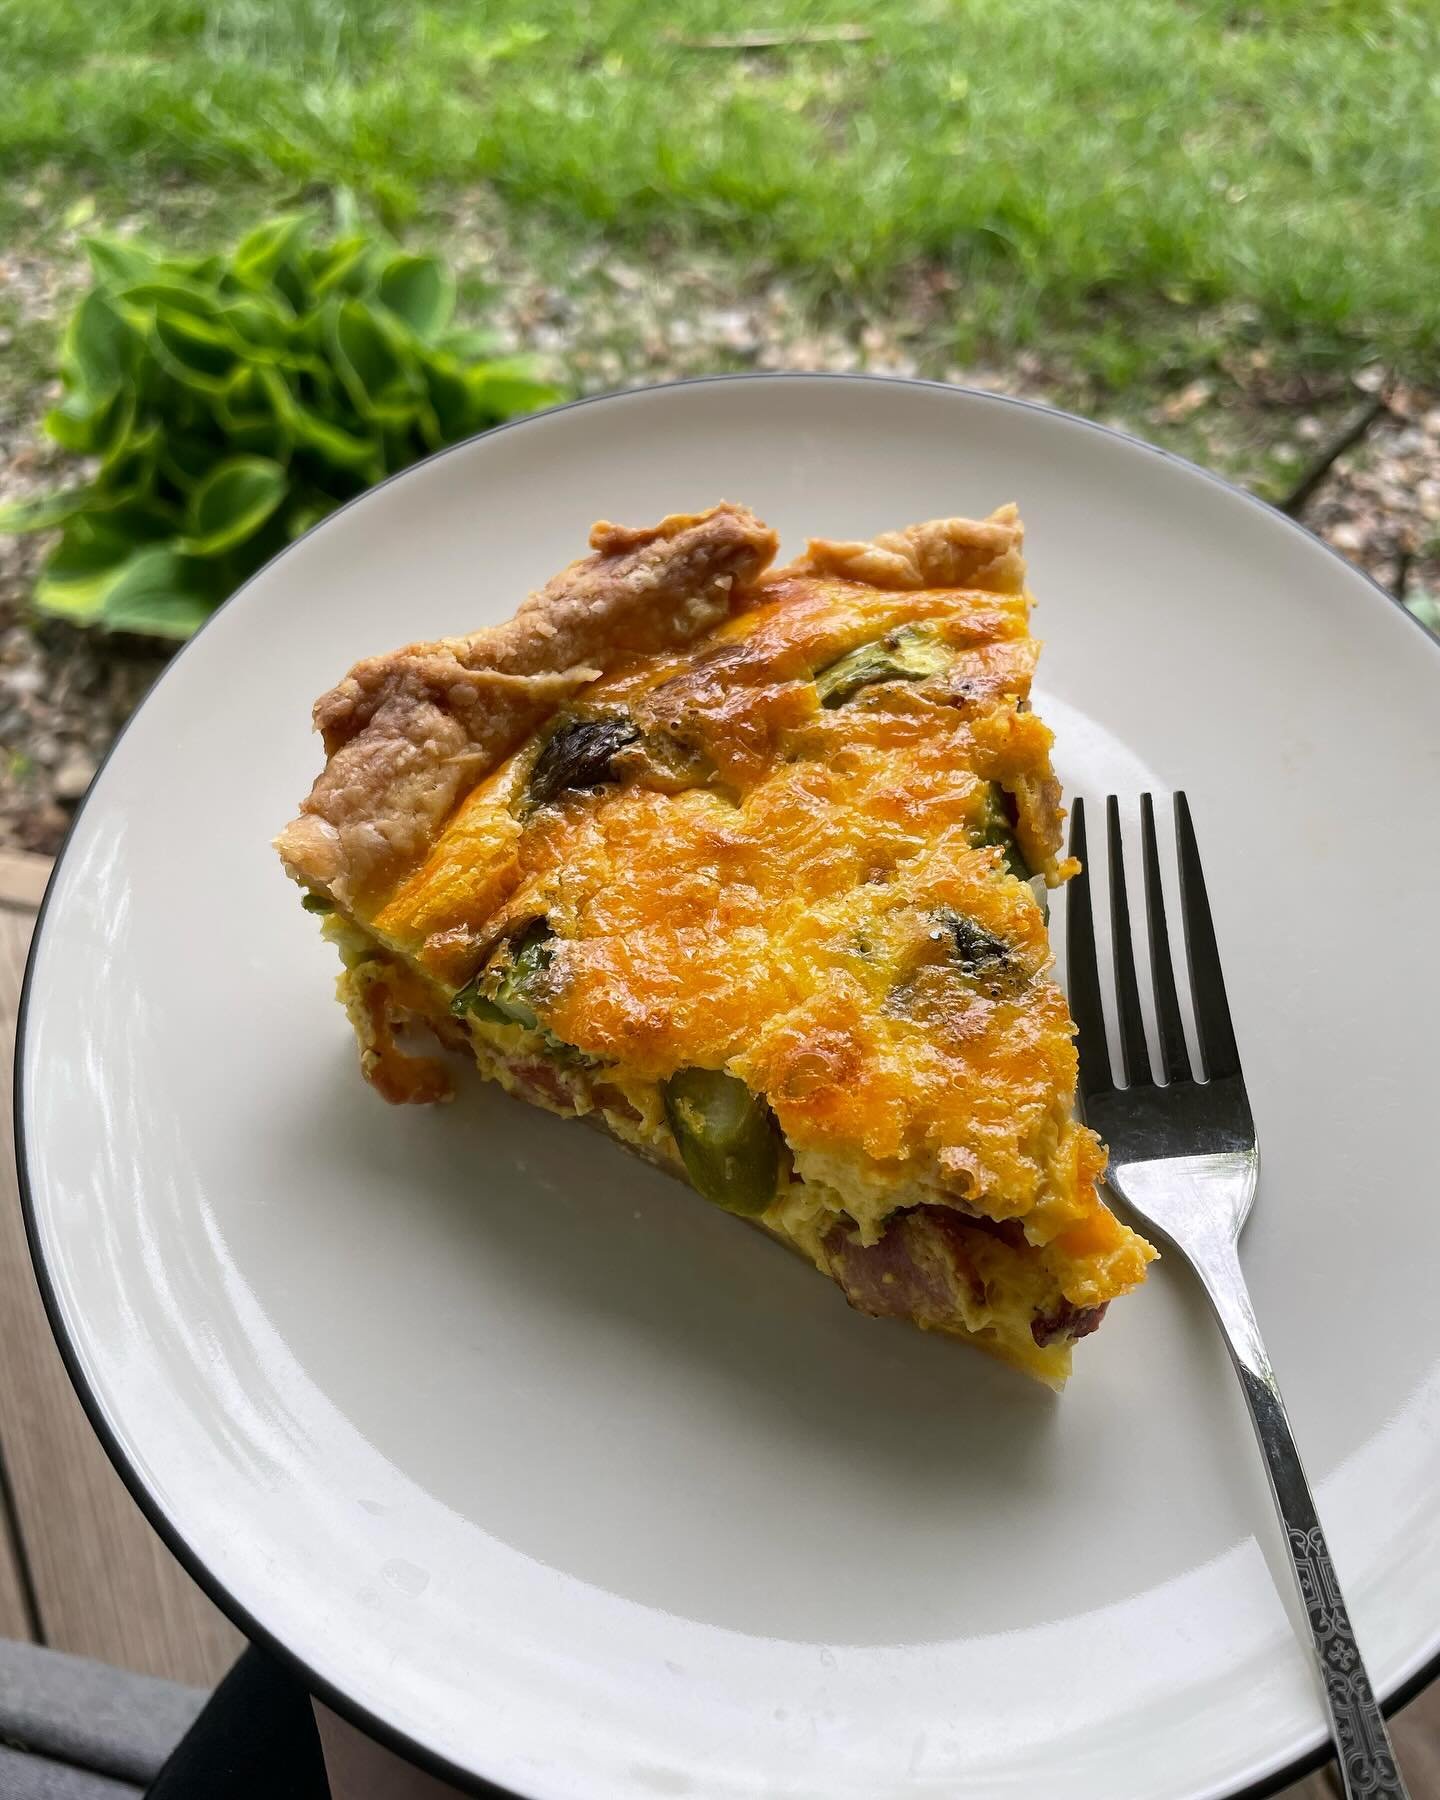 Usually I teach on Sundays. Today I baked a quiche with fresh asparagus from my mom&rsquo;s garden instead. Probably a picnic later with @scott.vanzile 

#quiche #asparagus #michigan #chef #travelchef #eggs #bacon #baking #